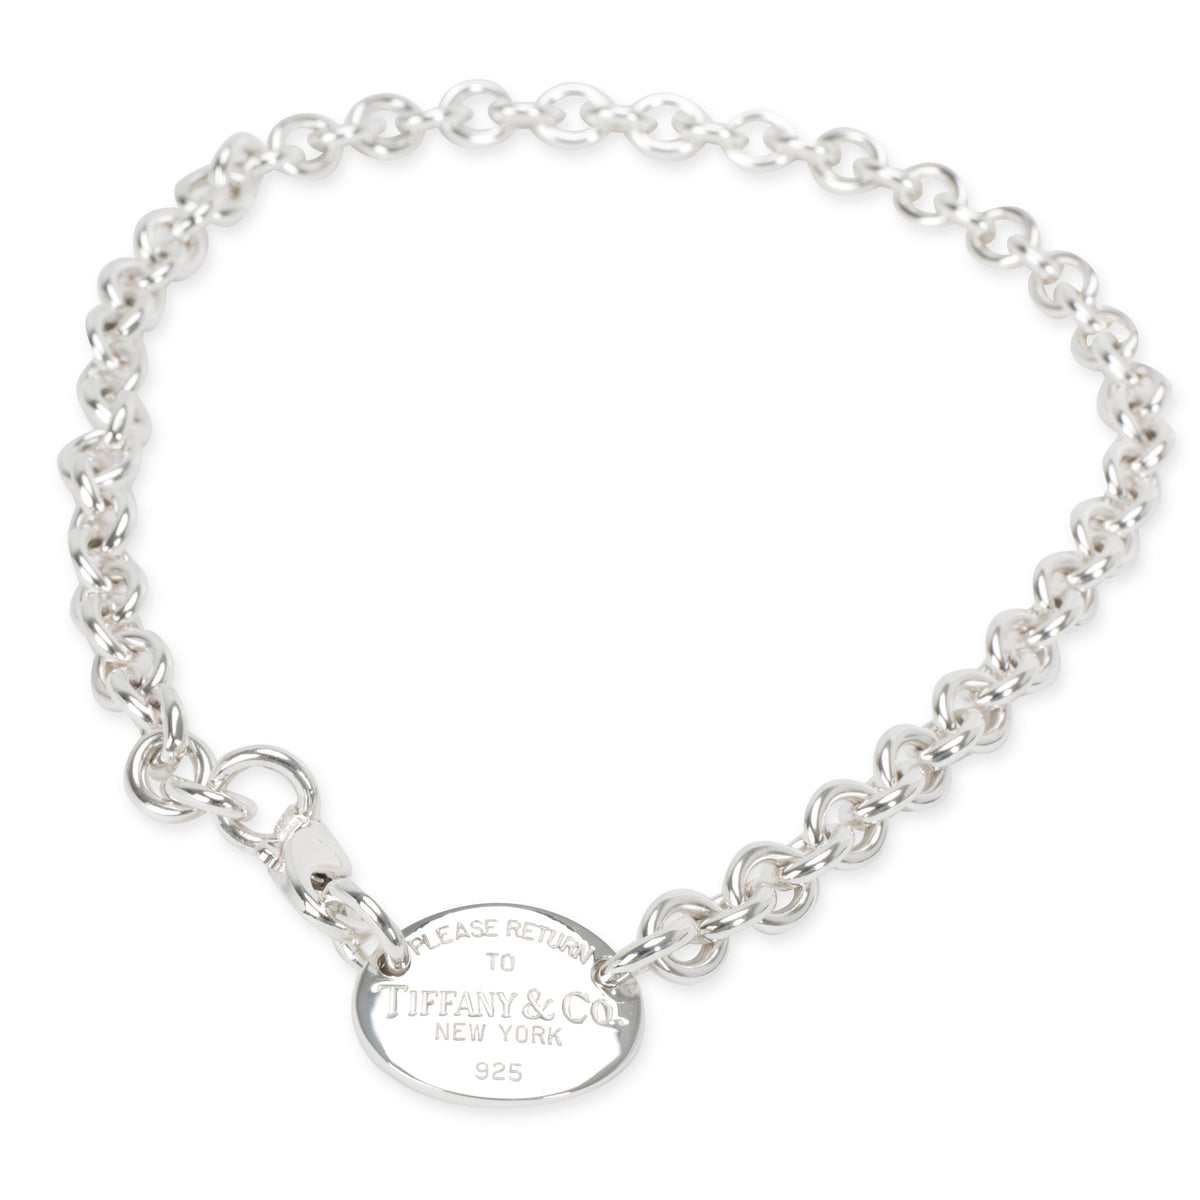 Tiffany & Co. Return to Tiffany Oval Tag Necklace in  Sterling Silver